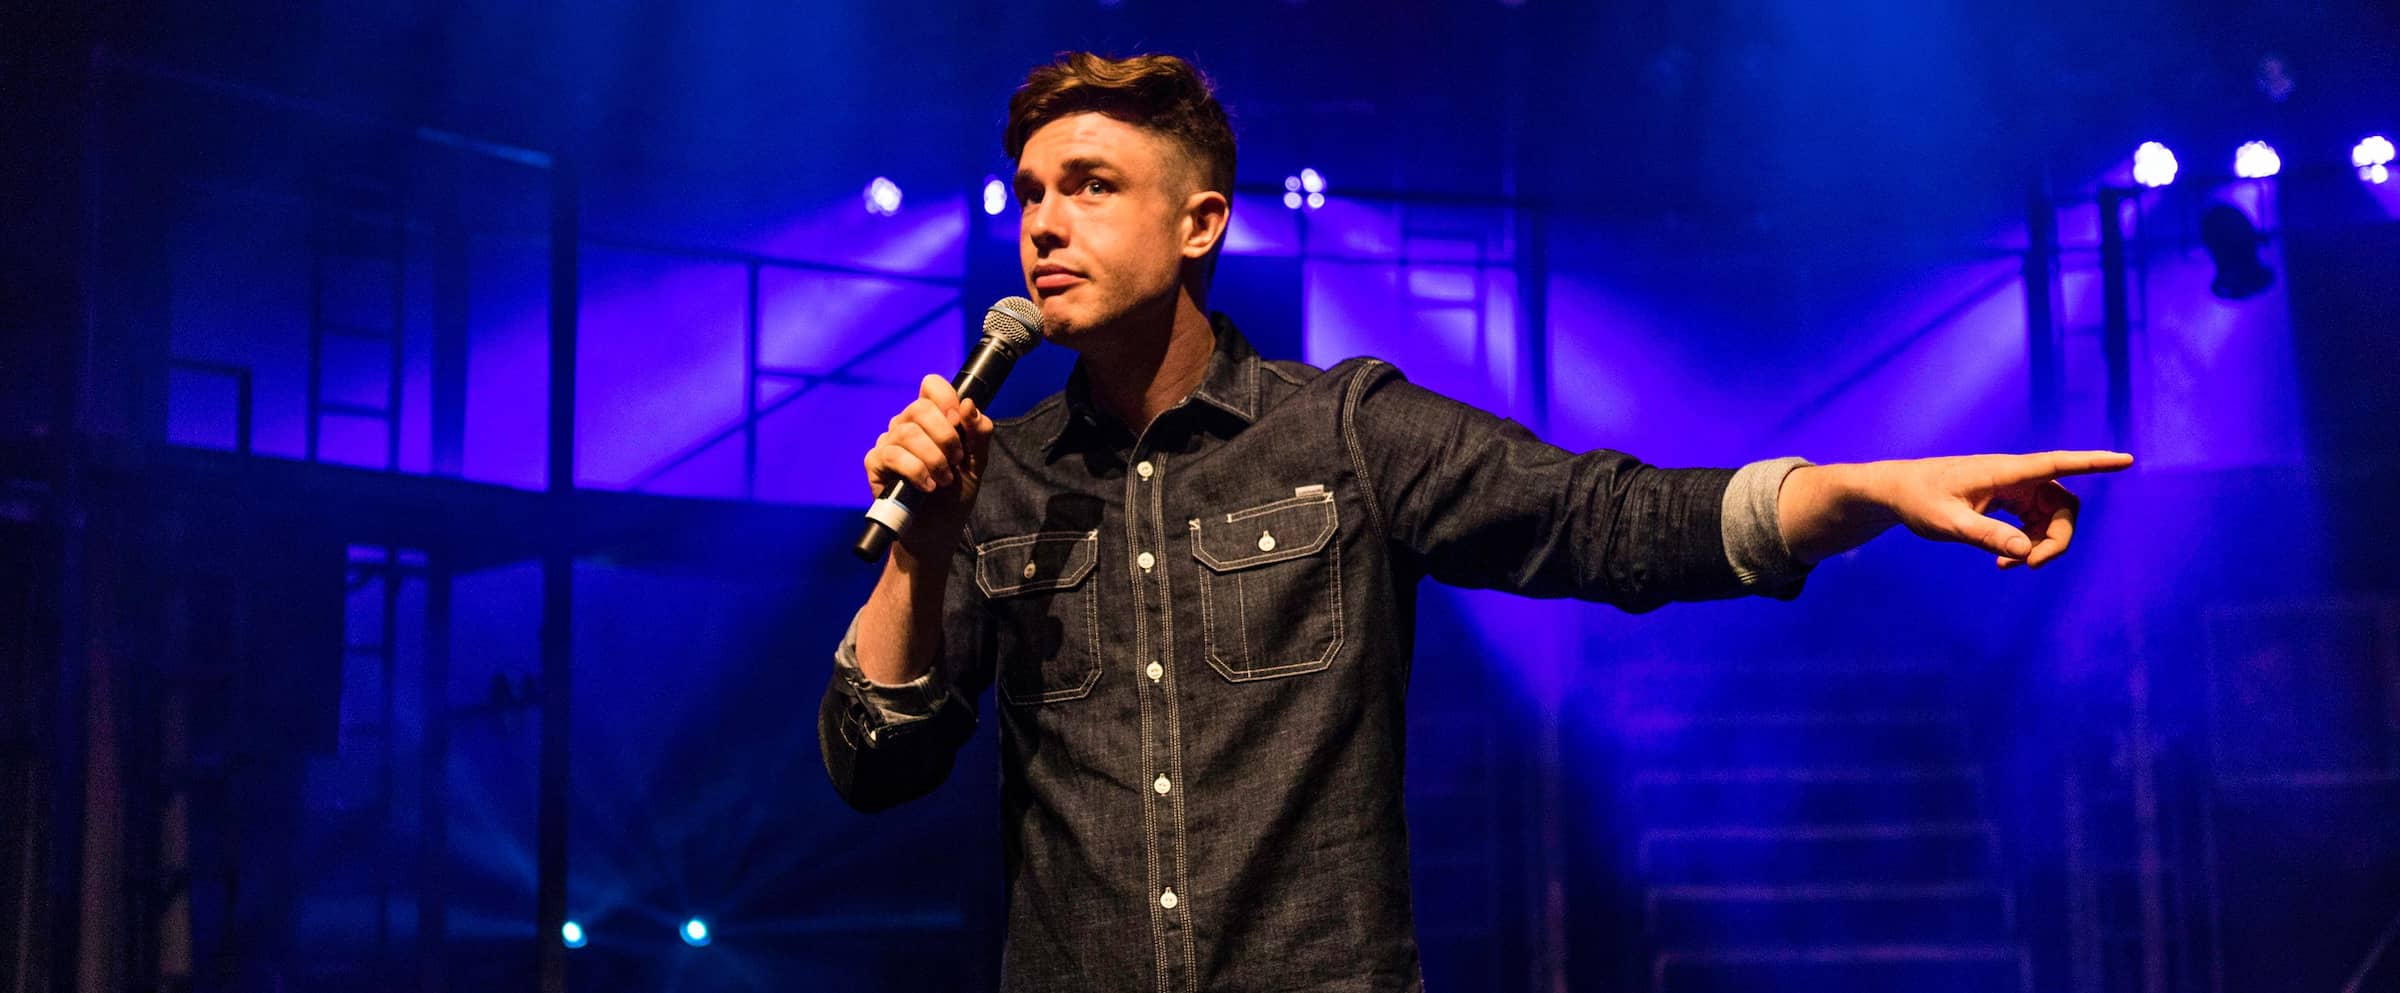 Ed gamble on how having diabetes is his ‘comedy superpower’